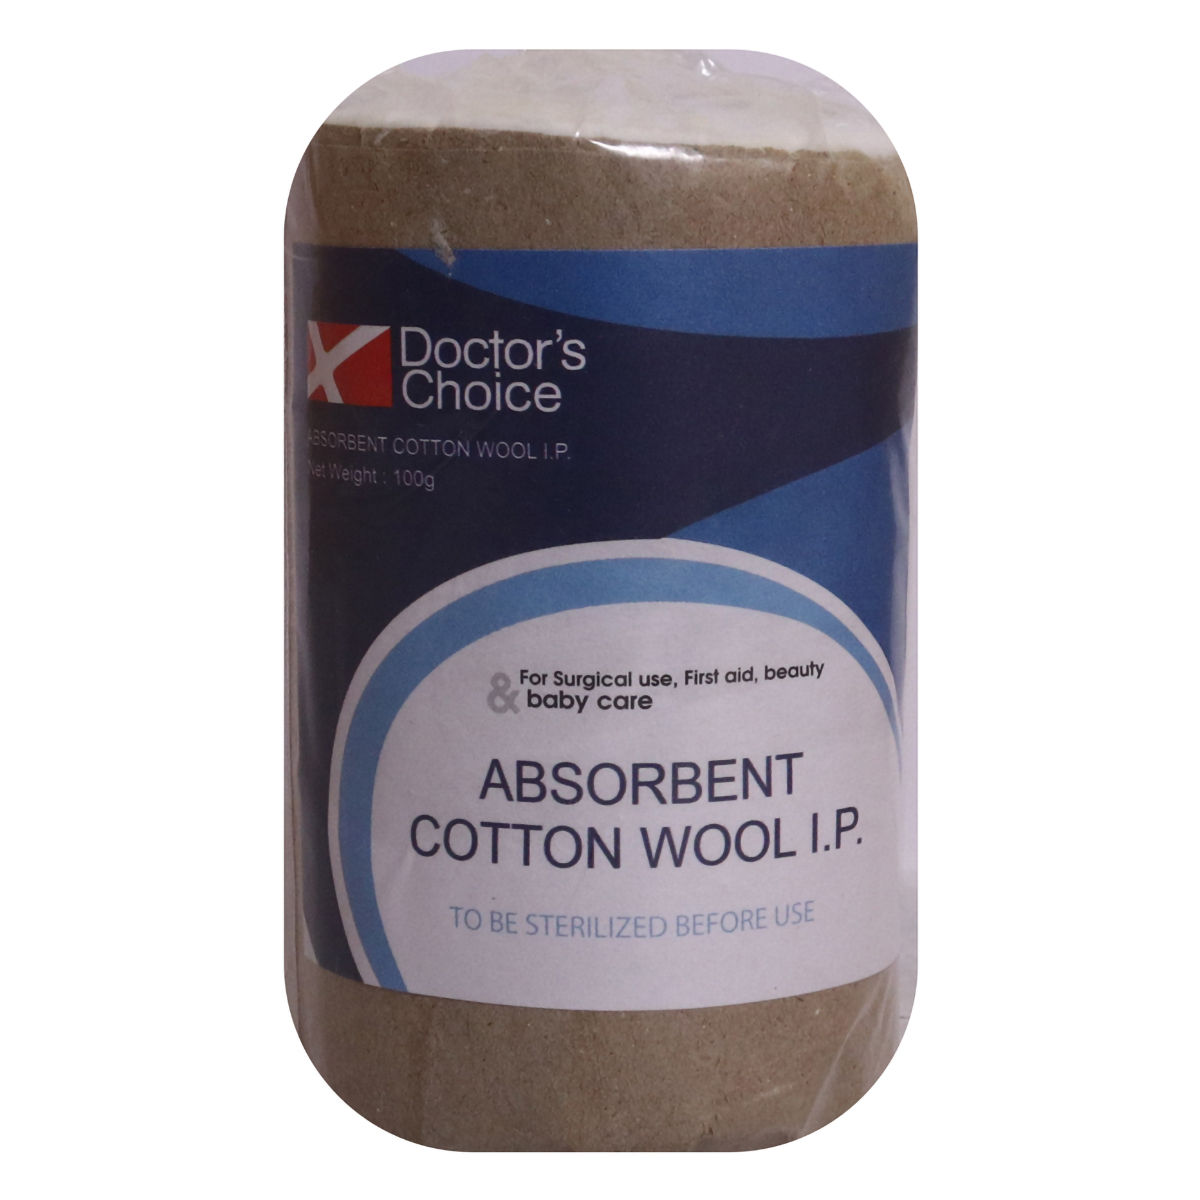 Buy Doctor's Choice Absorbent Cotton Wool I.P., 100 gm Online